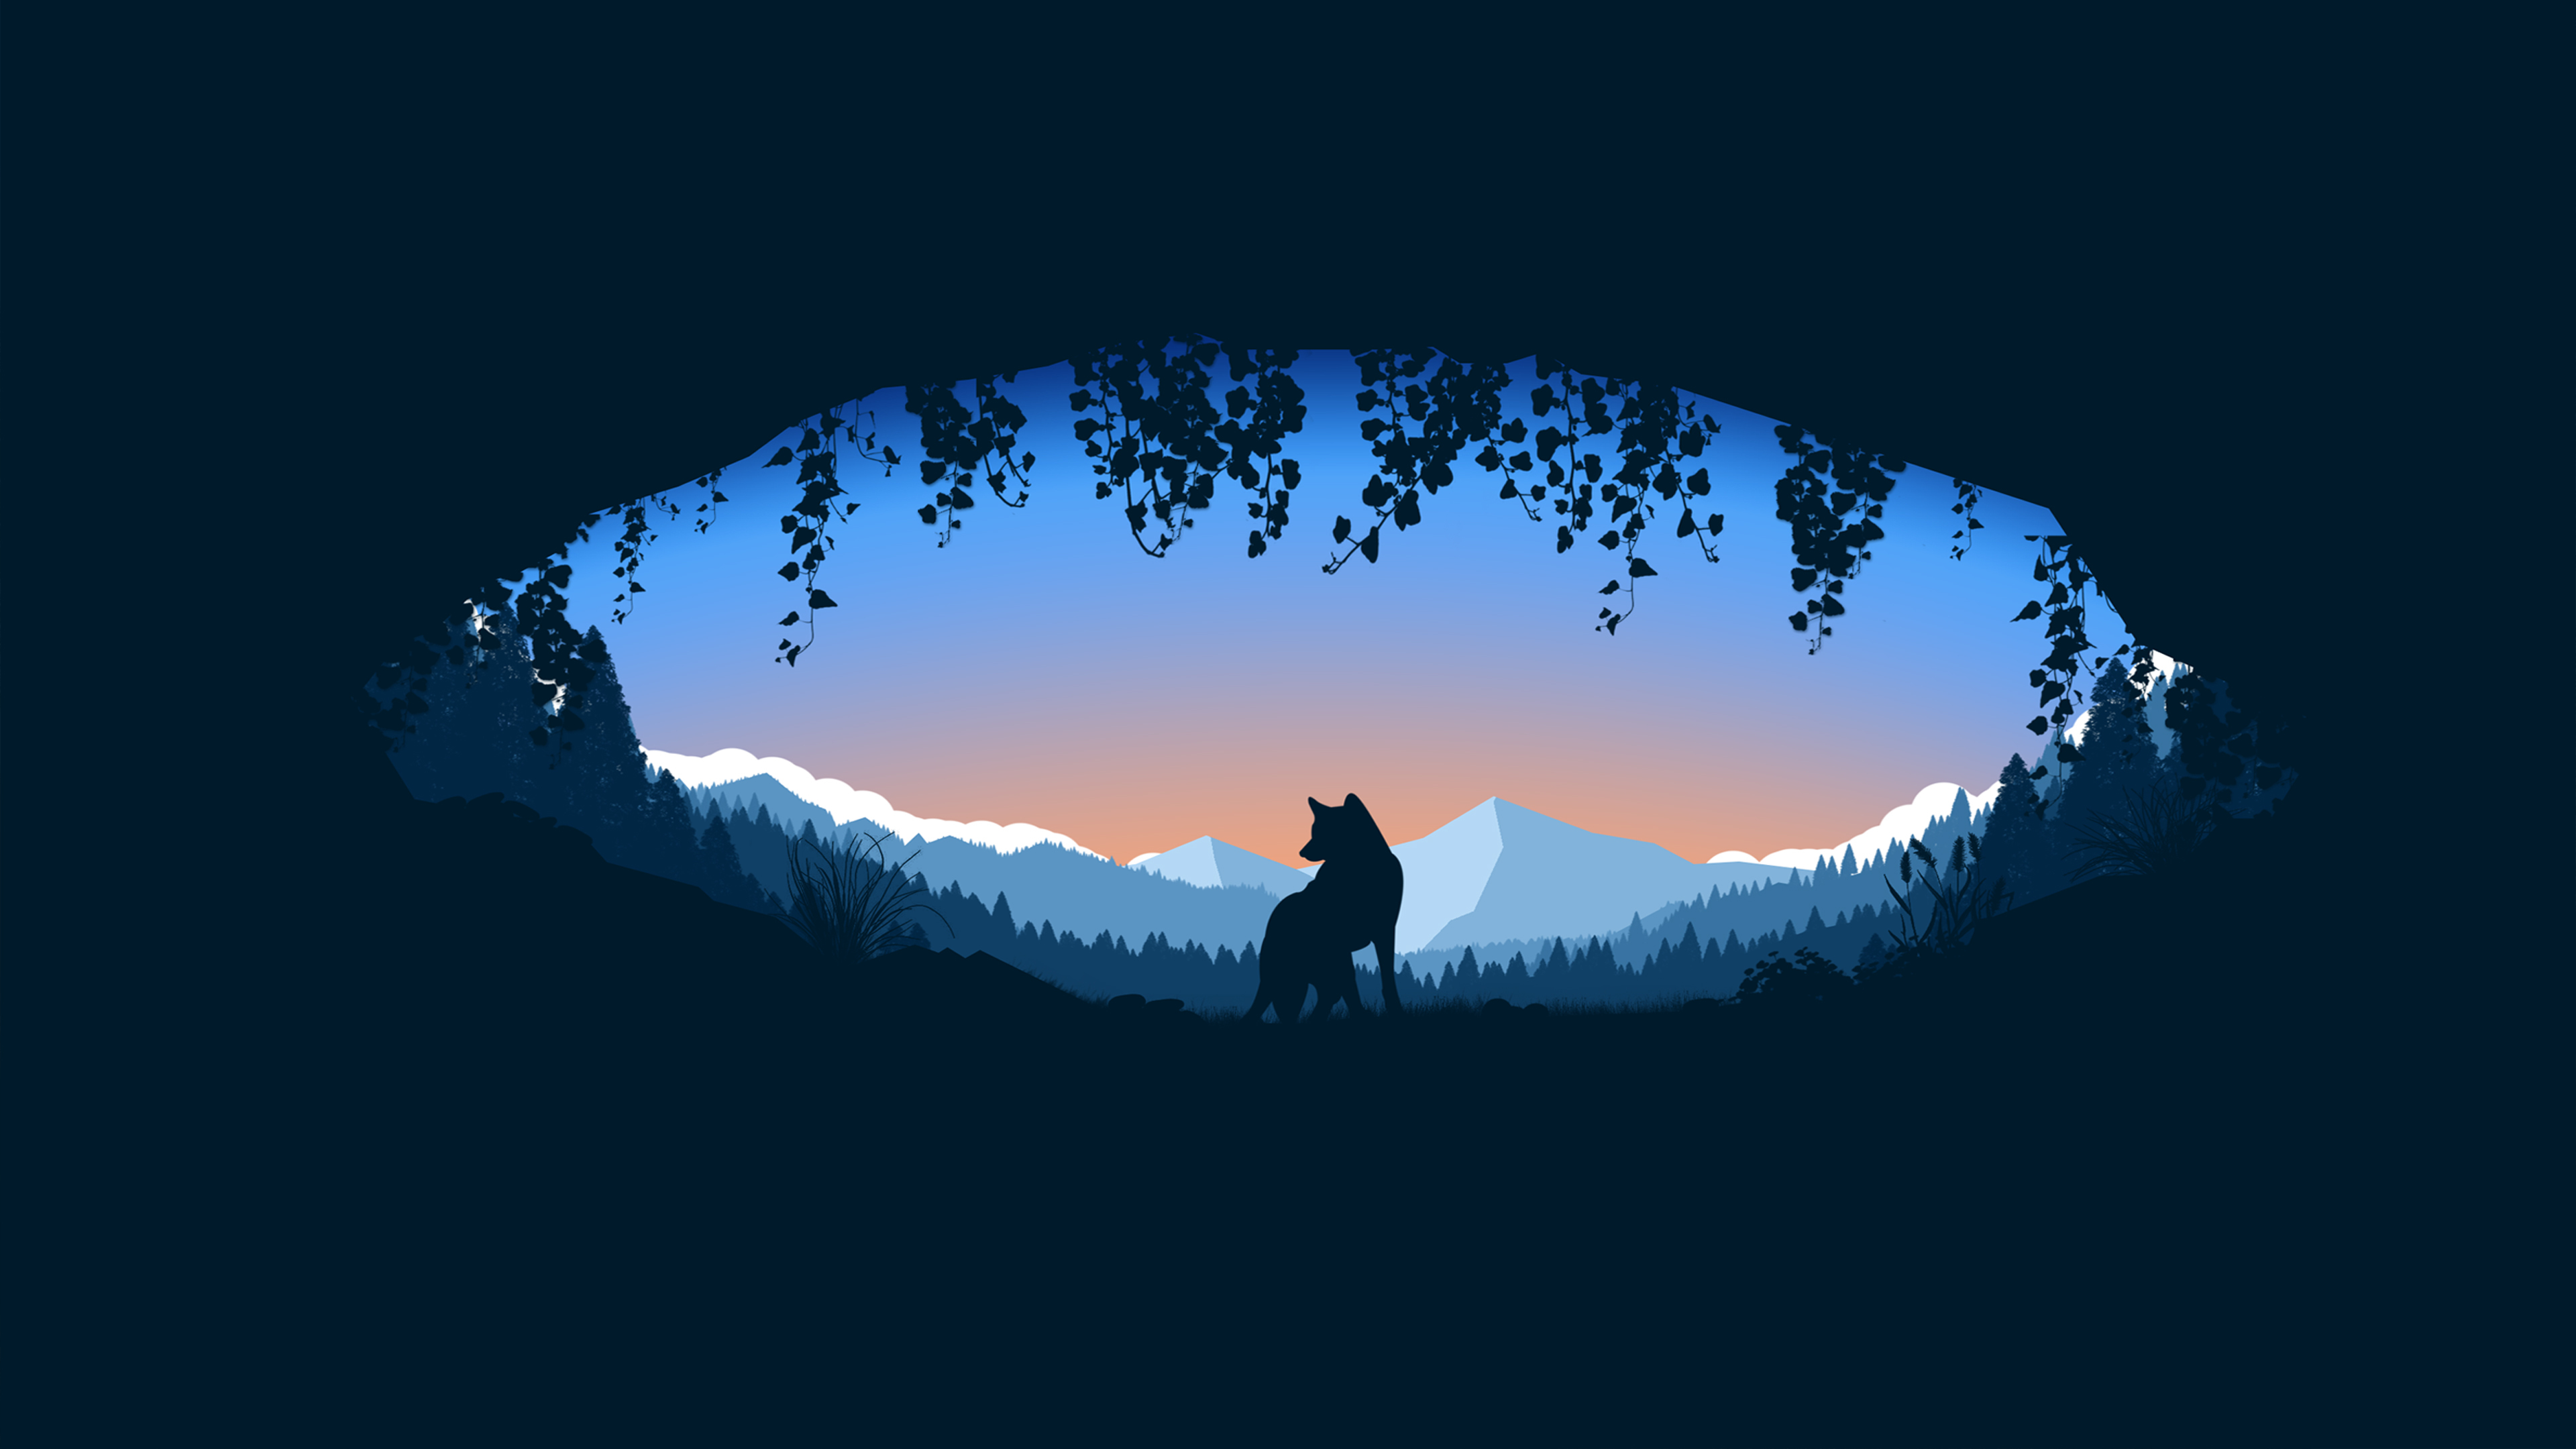 General 3840x2160 cave wolf artwork minimalism simple background silhouette sky mountains plants trees